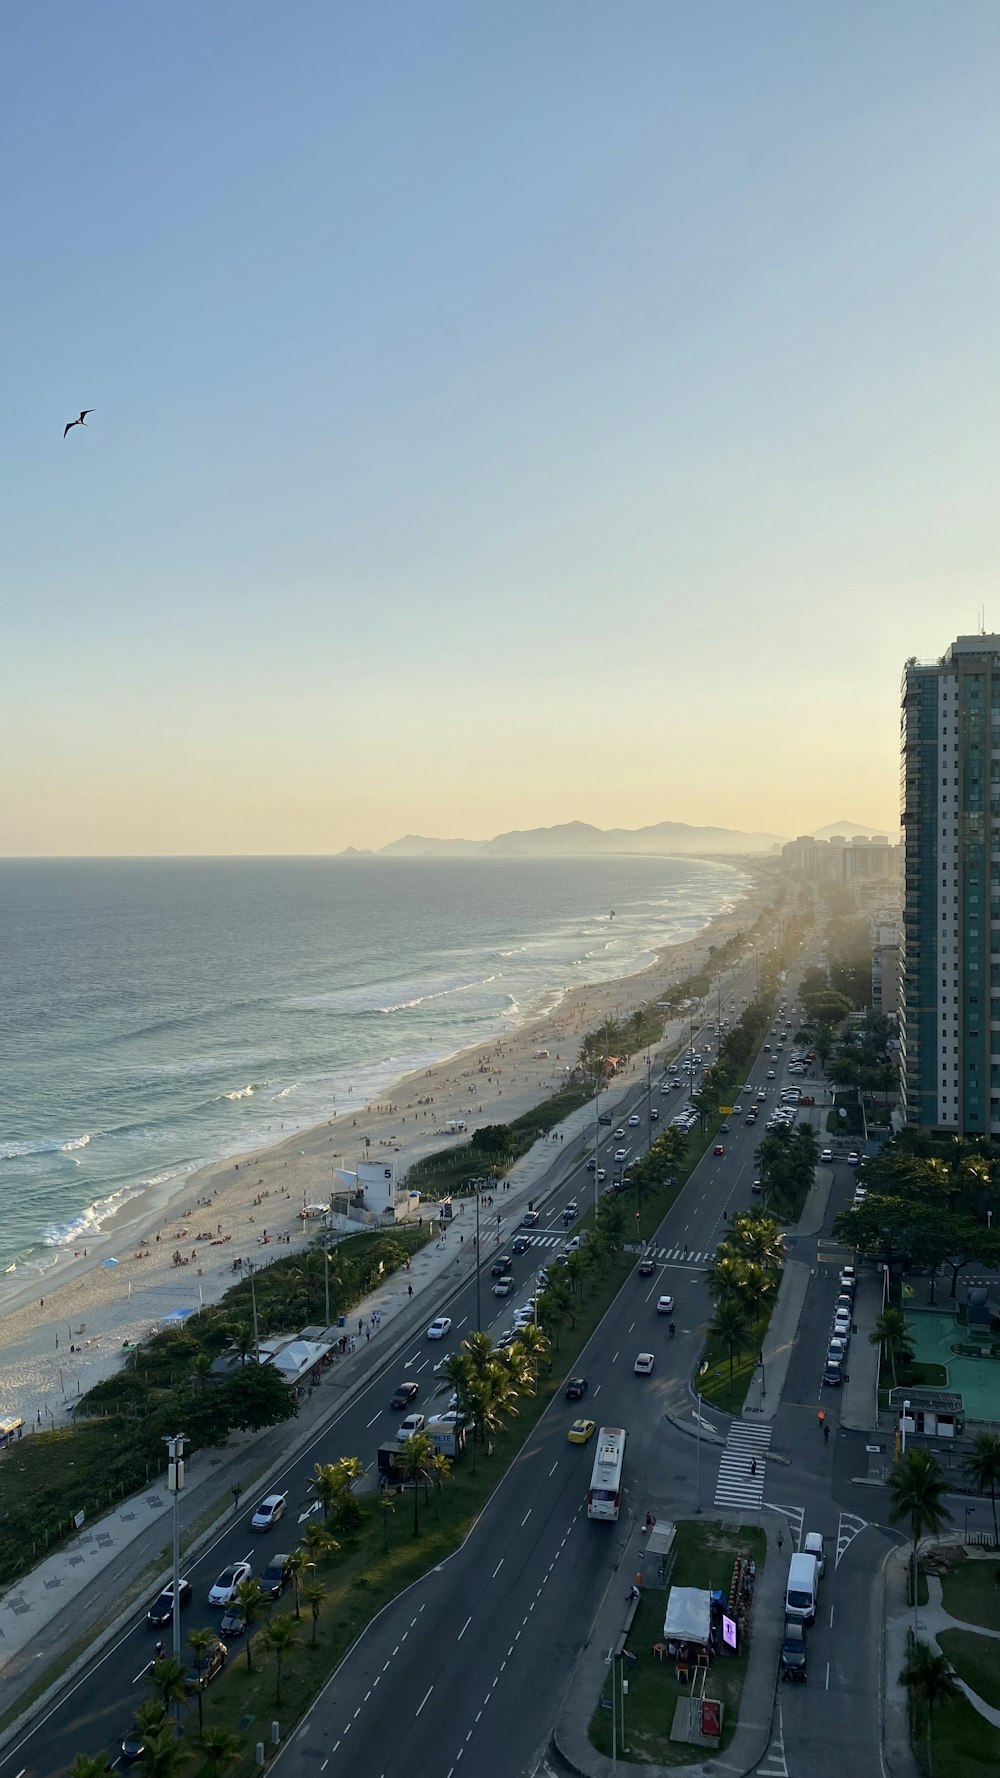 a view of a beach and ocean from a high rise building